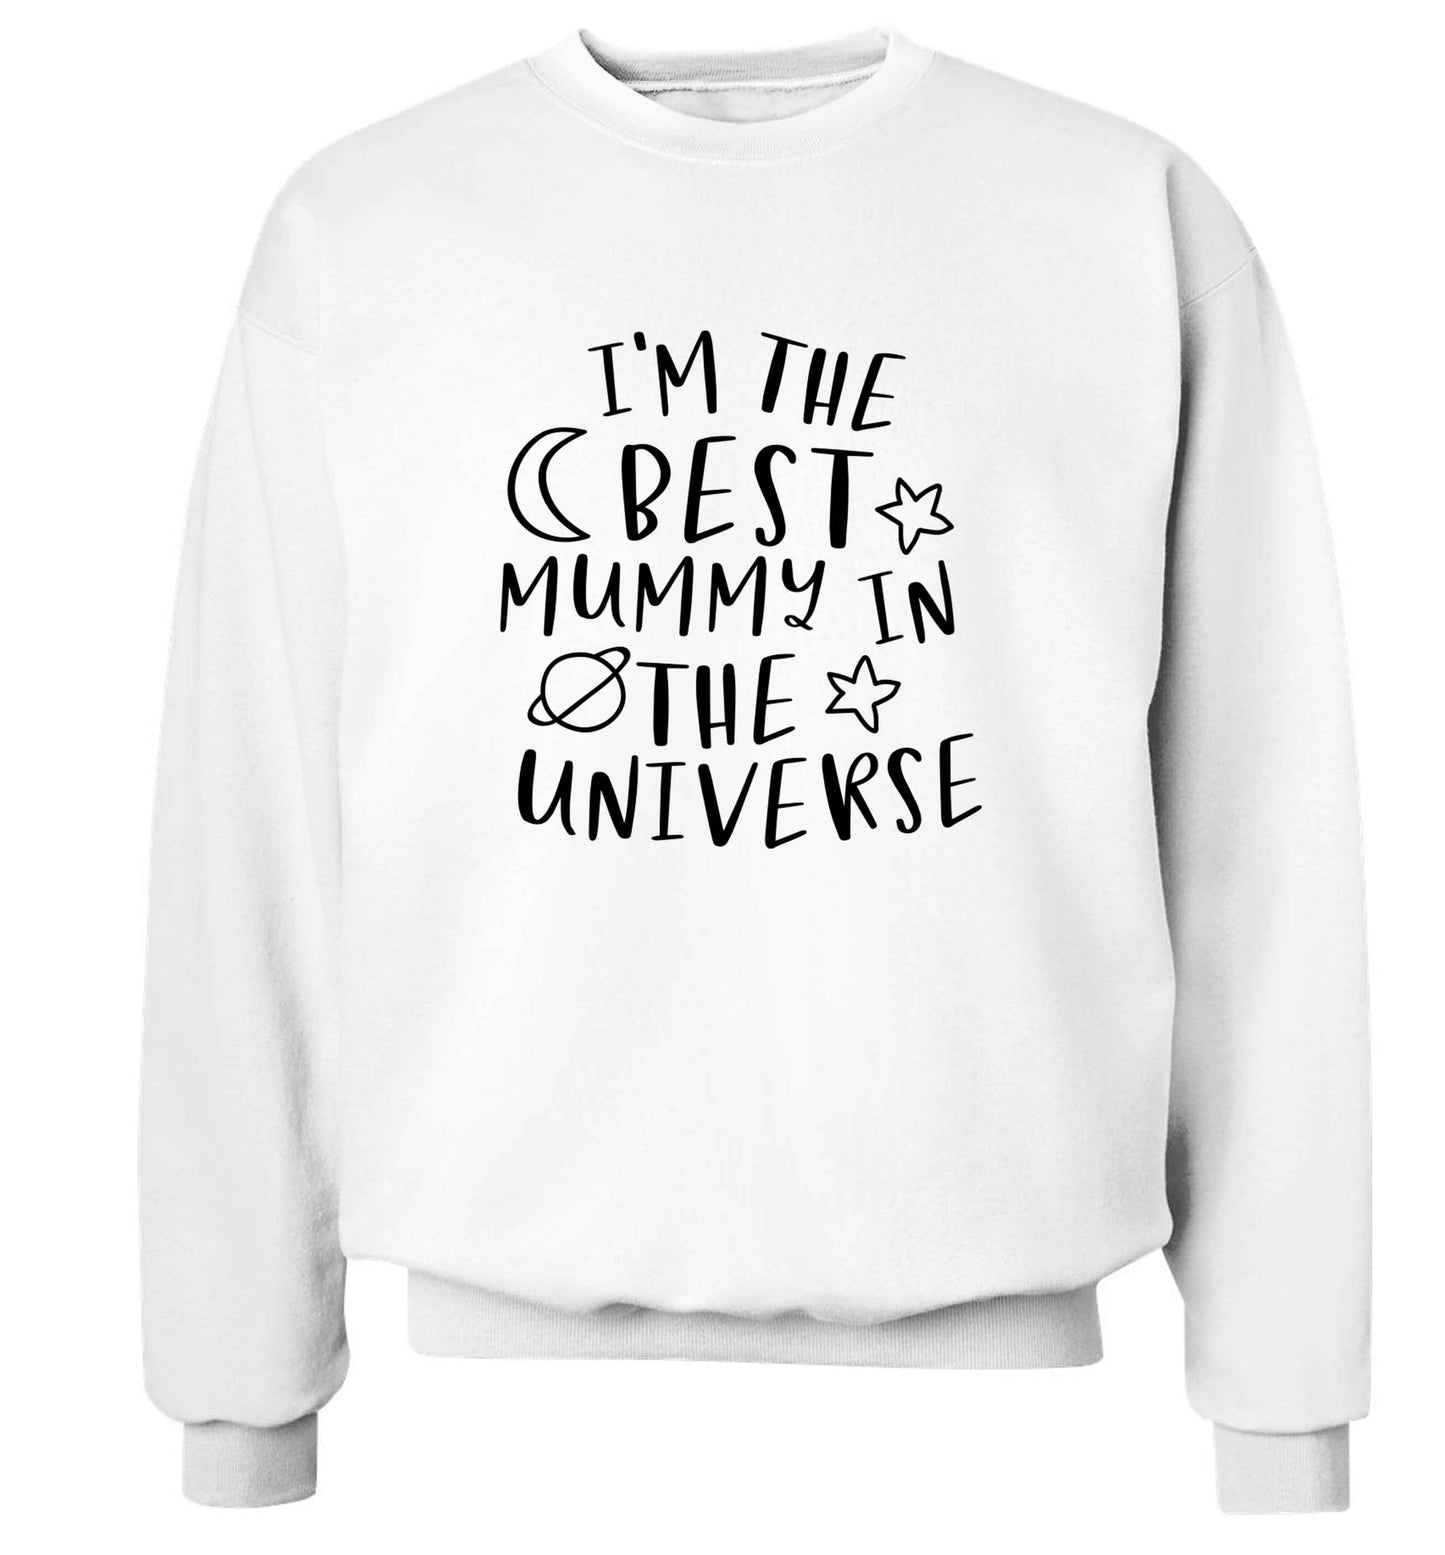 I'm the best mummy in the universe adult's unisex white sweater 2XL